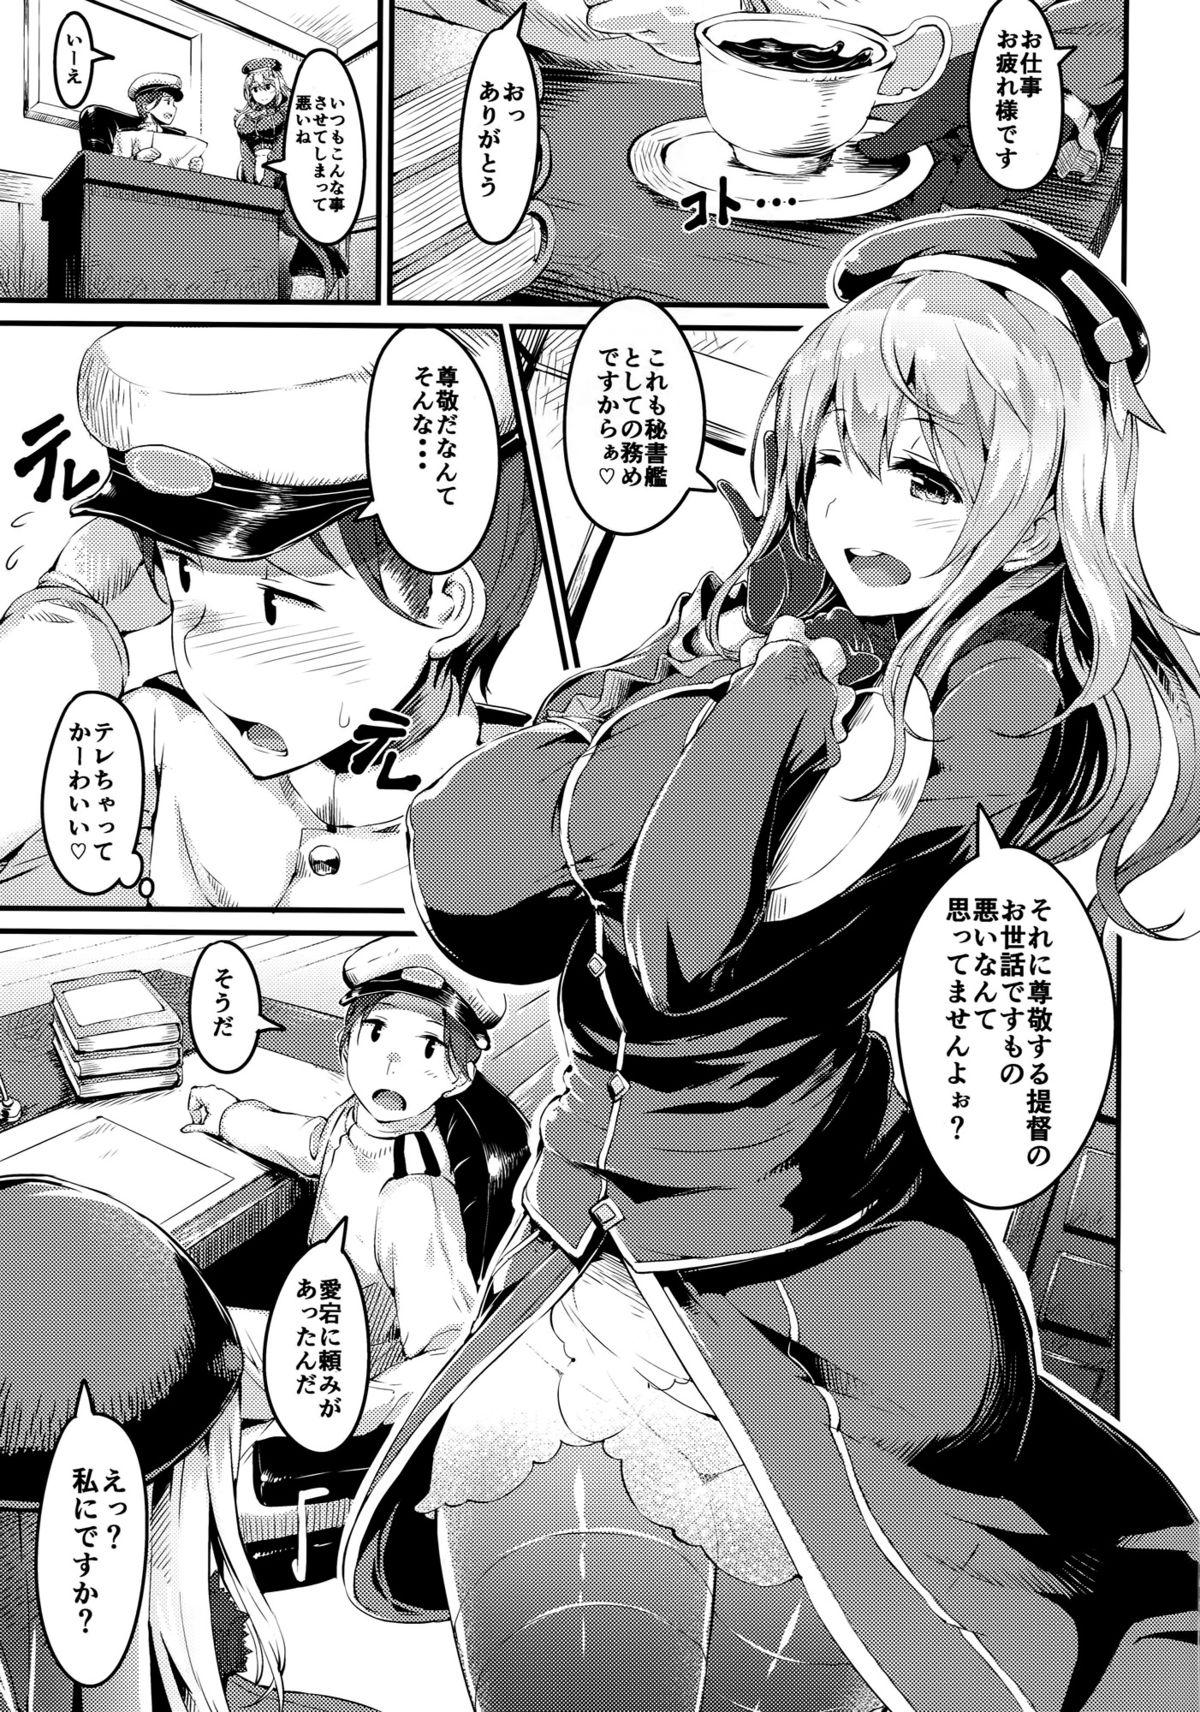 Muscle ATG - Kantai collection Russia - Page 2